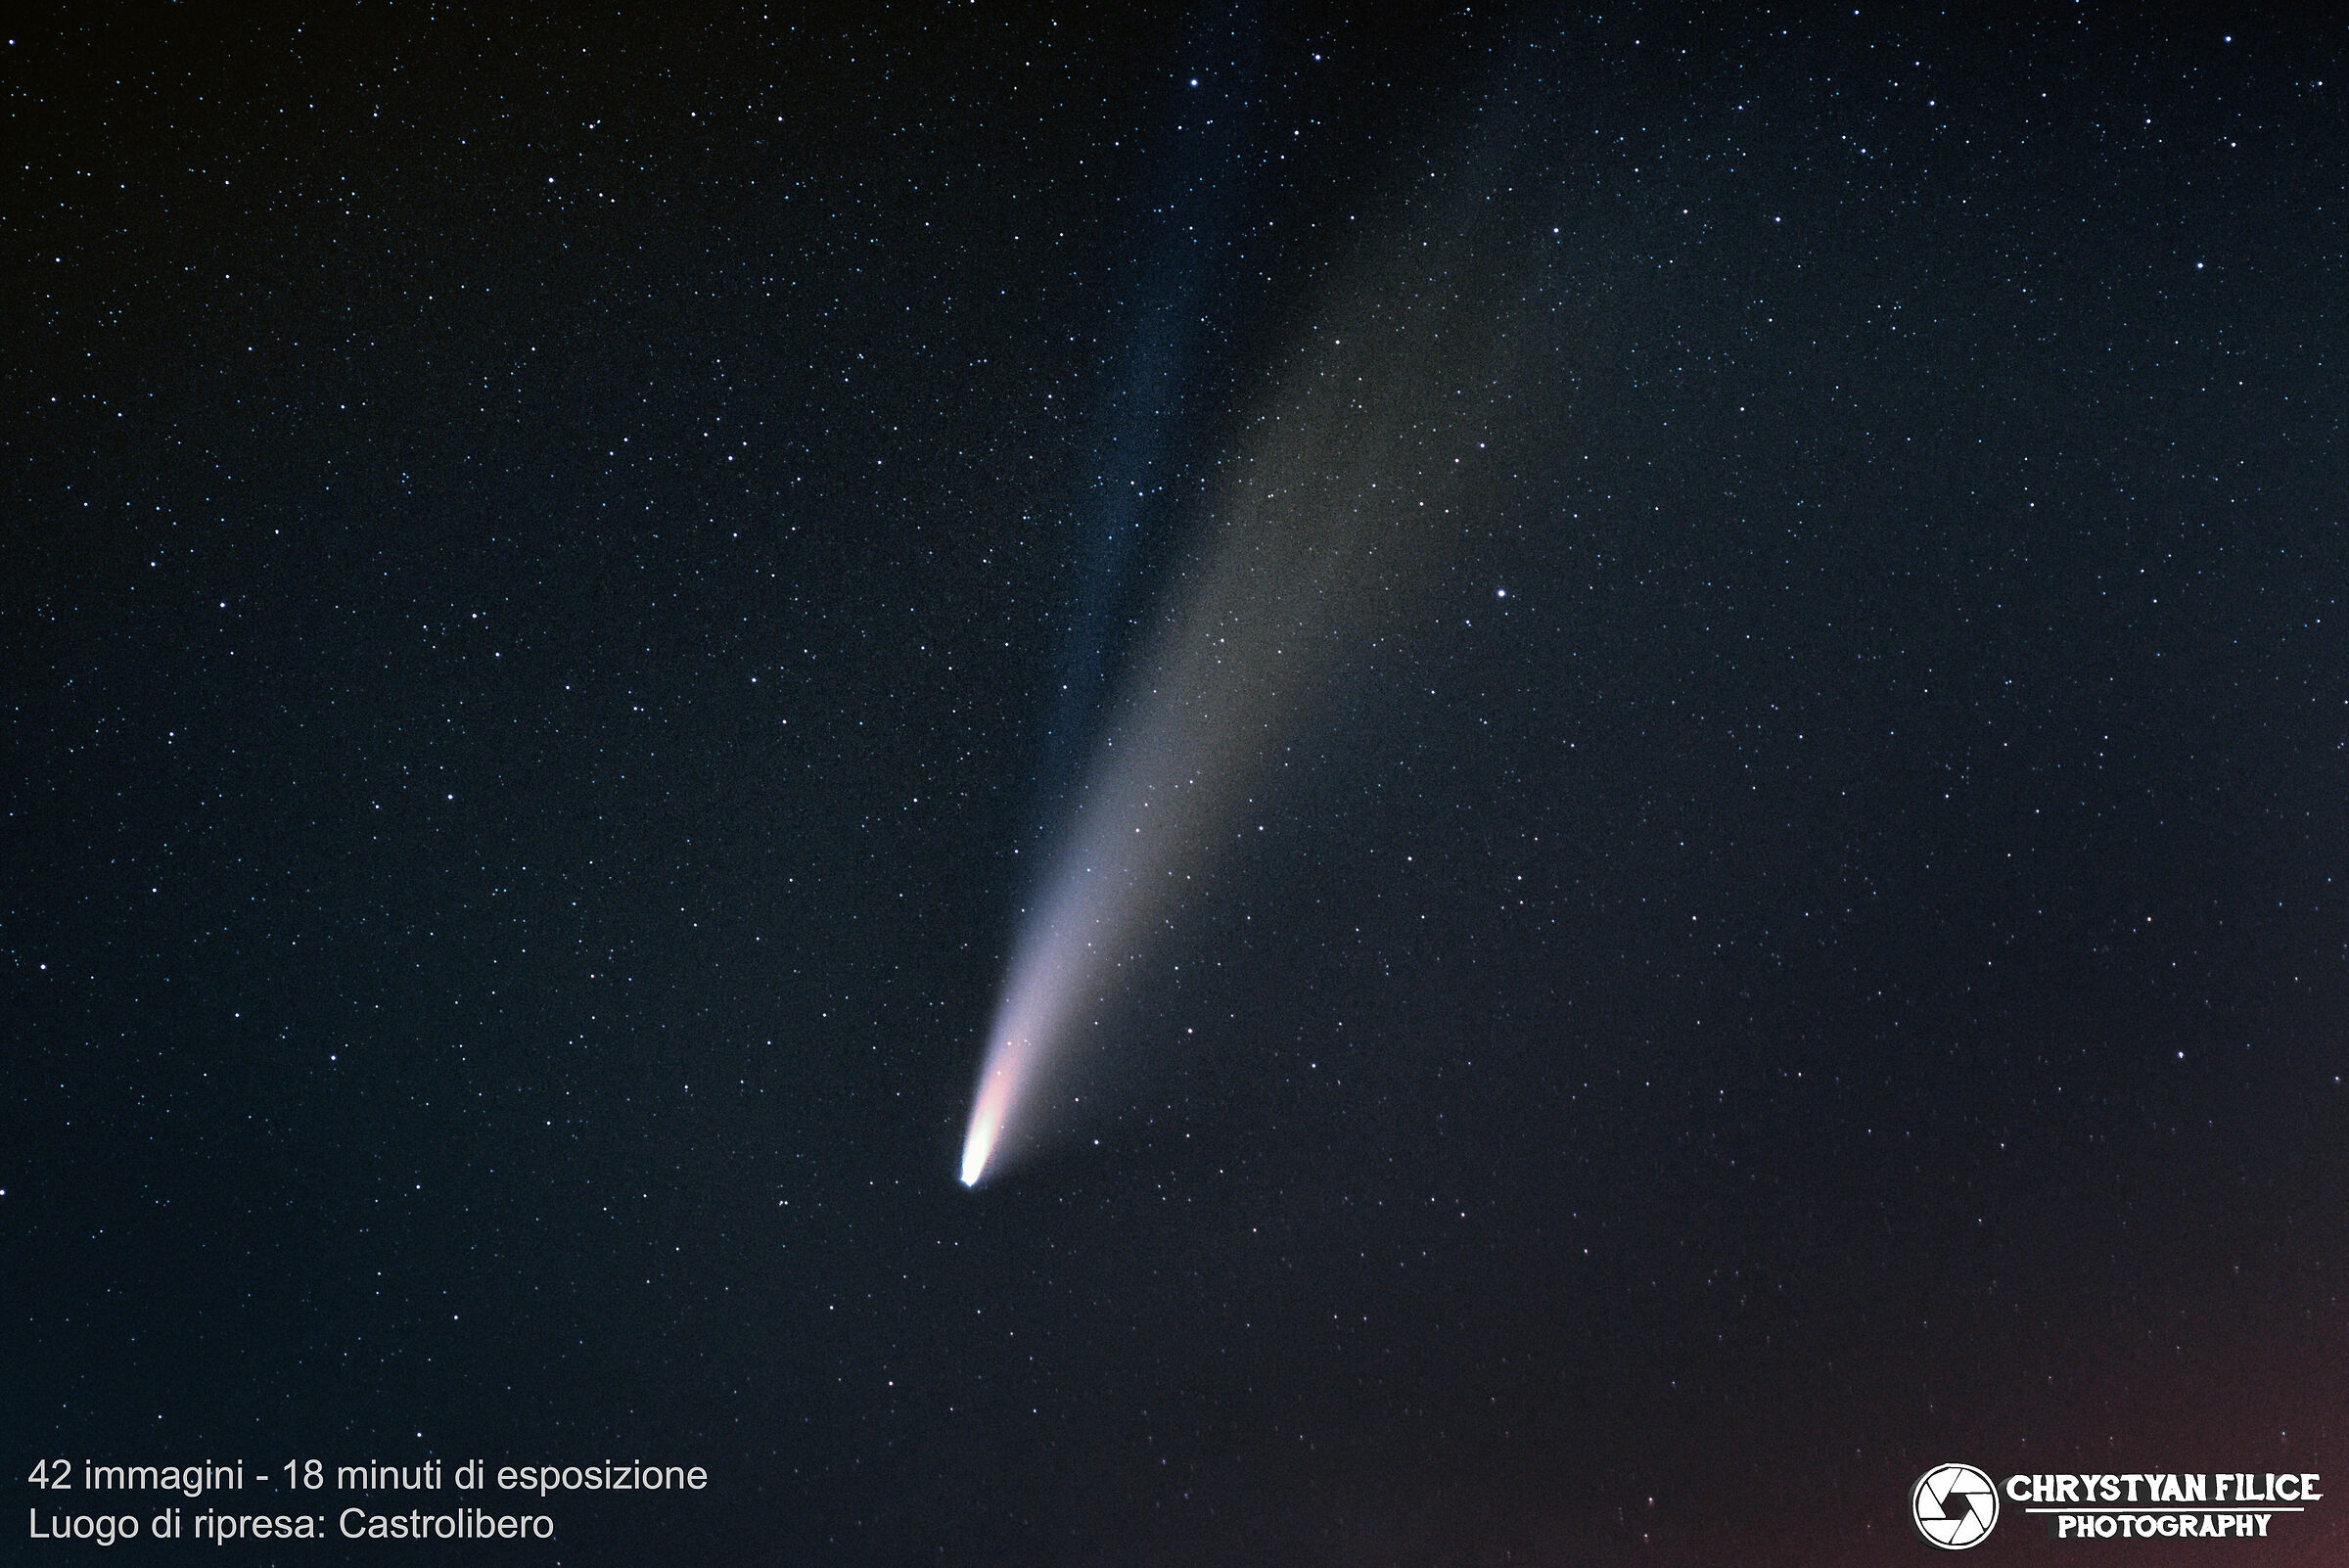 Comet C/2020 F3 NEOWISE...